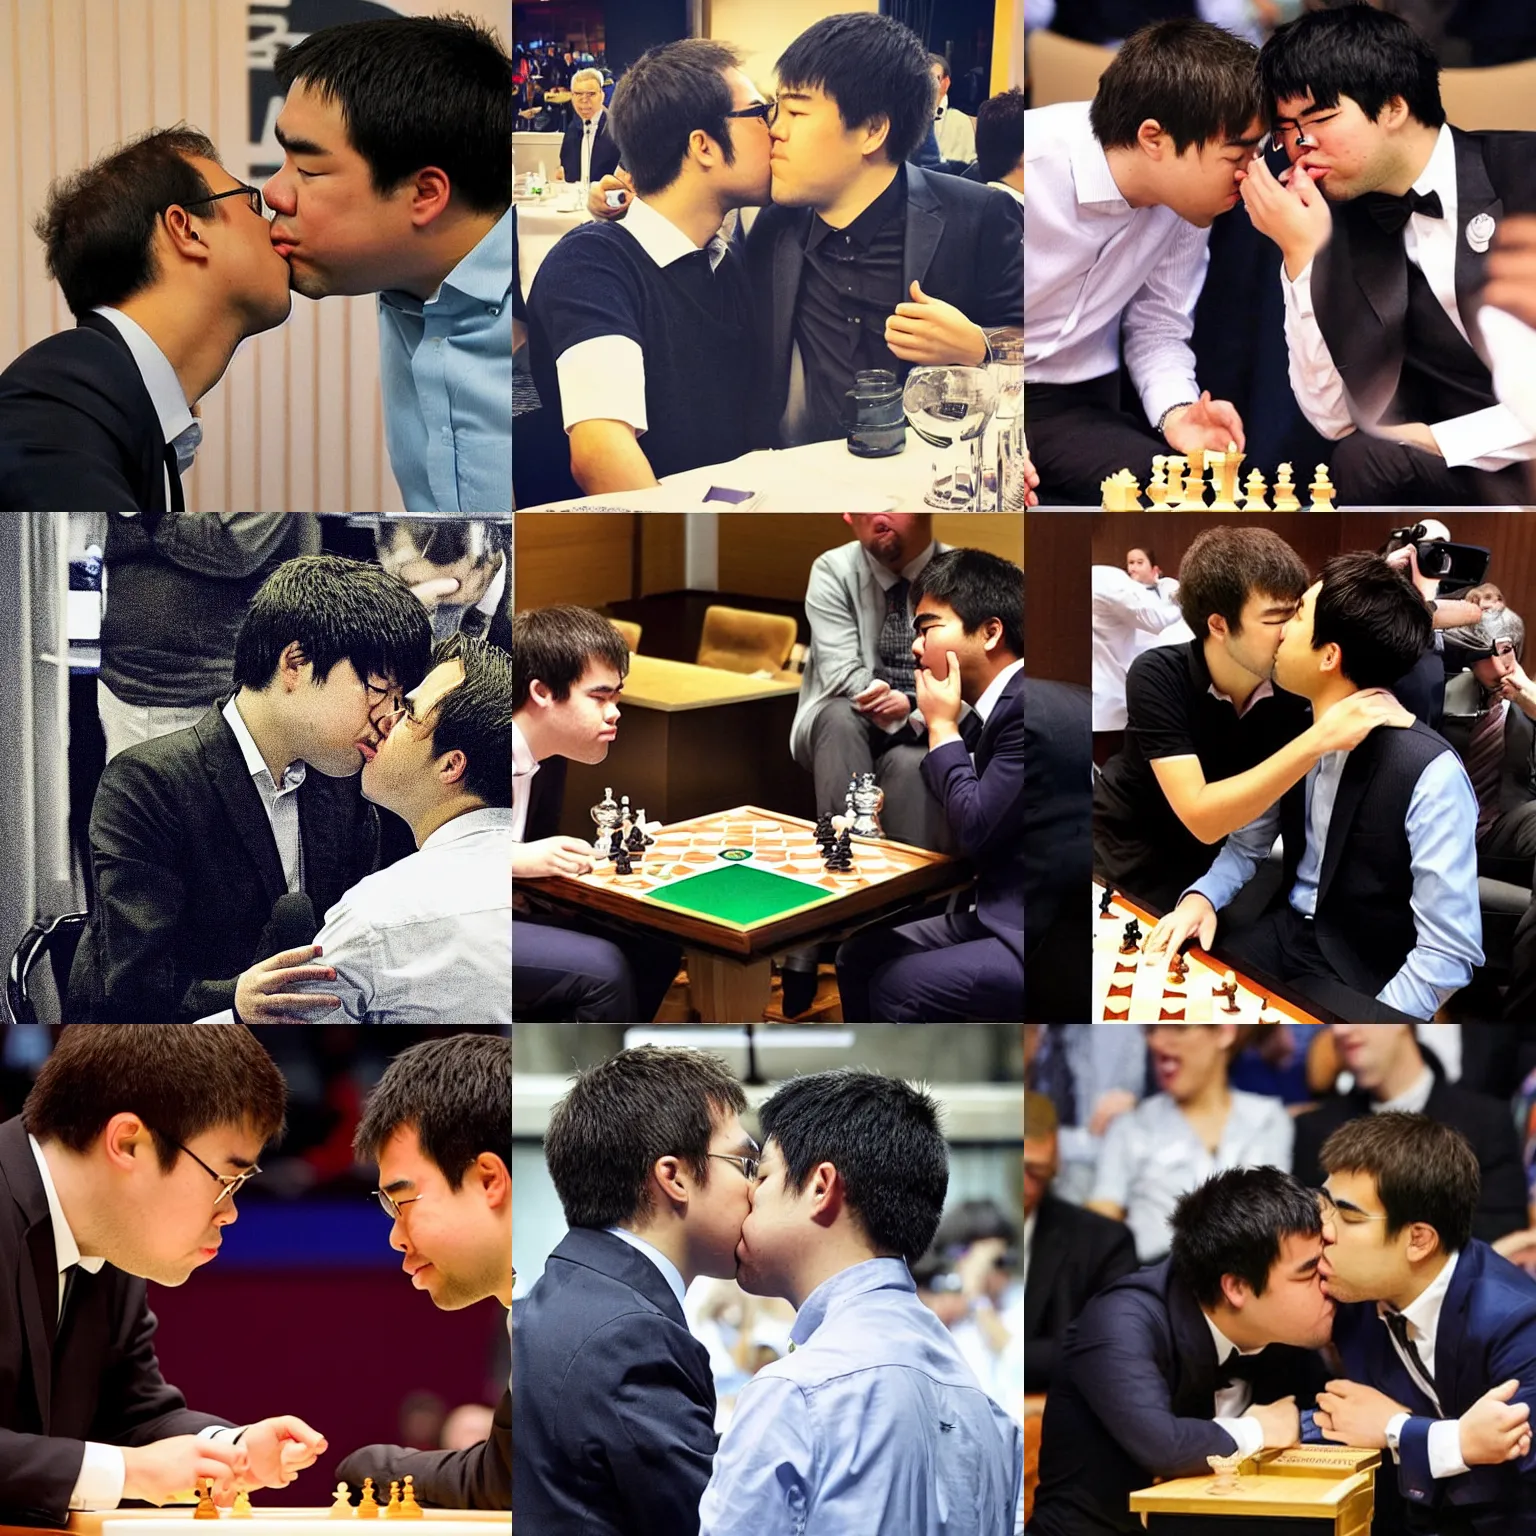 Prompt: “Magnus carlsen kissing hikaru nakamura. They are furiously making out”